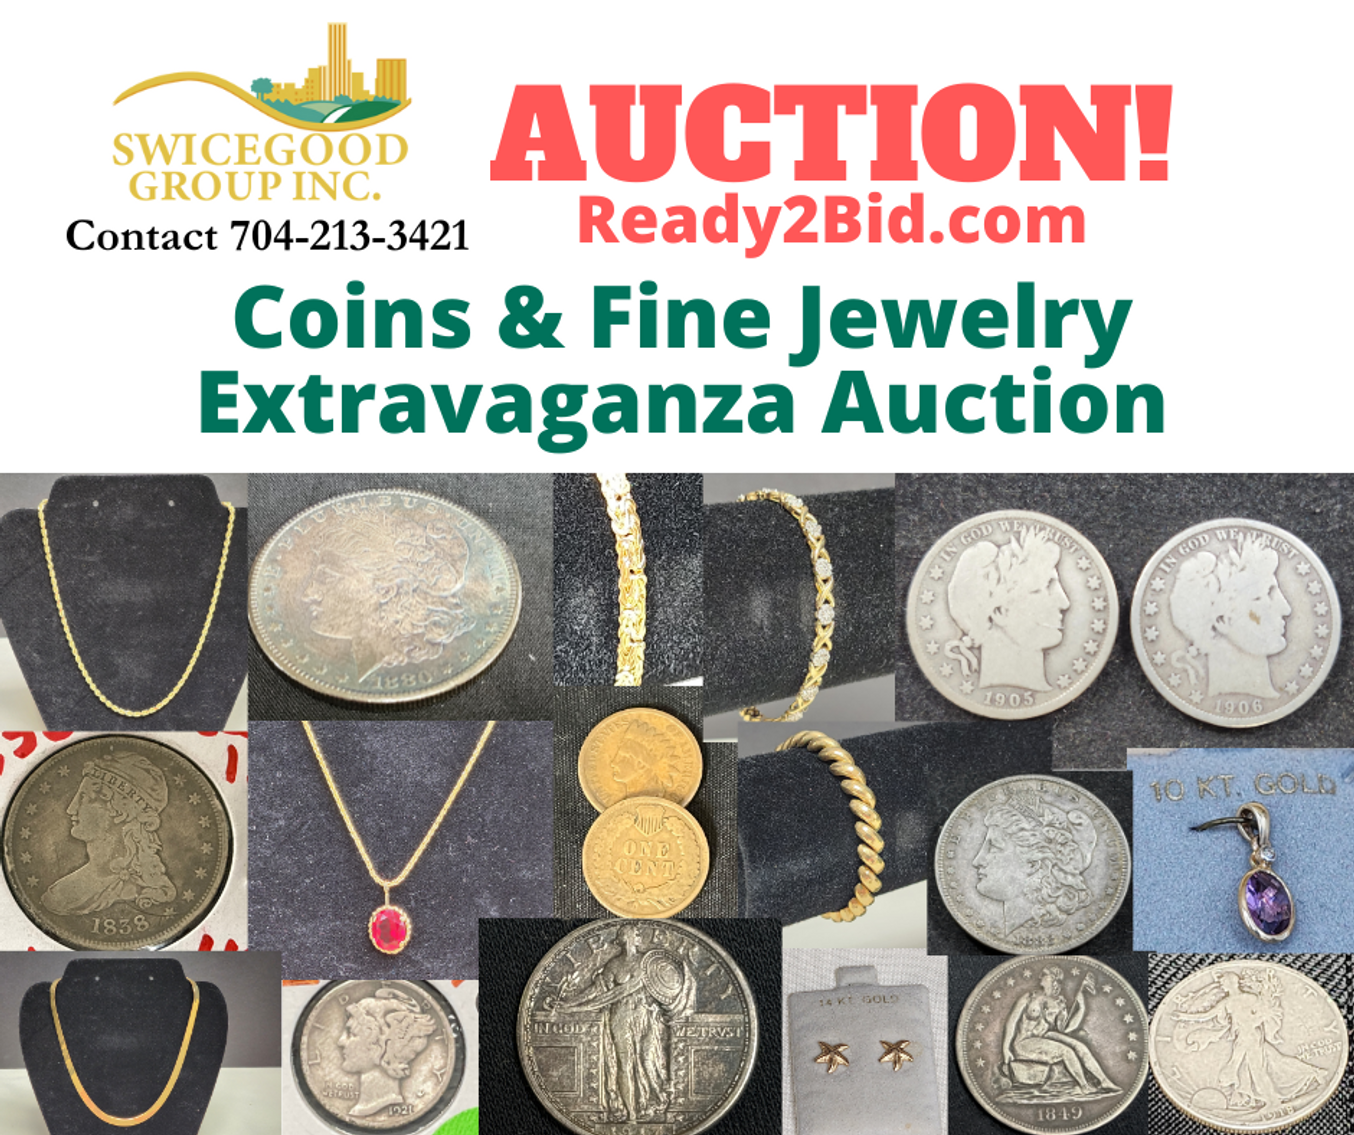 Coins & Fine Jewelry Extravaganza Auction